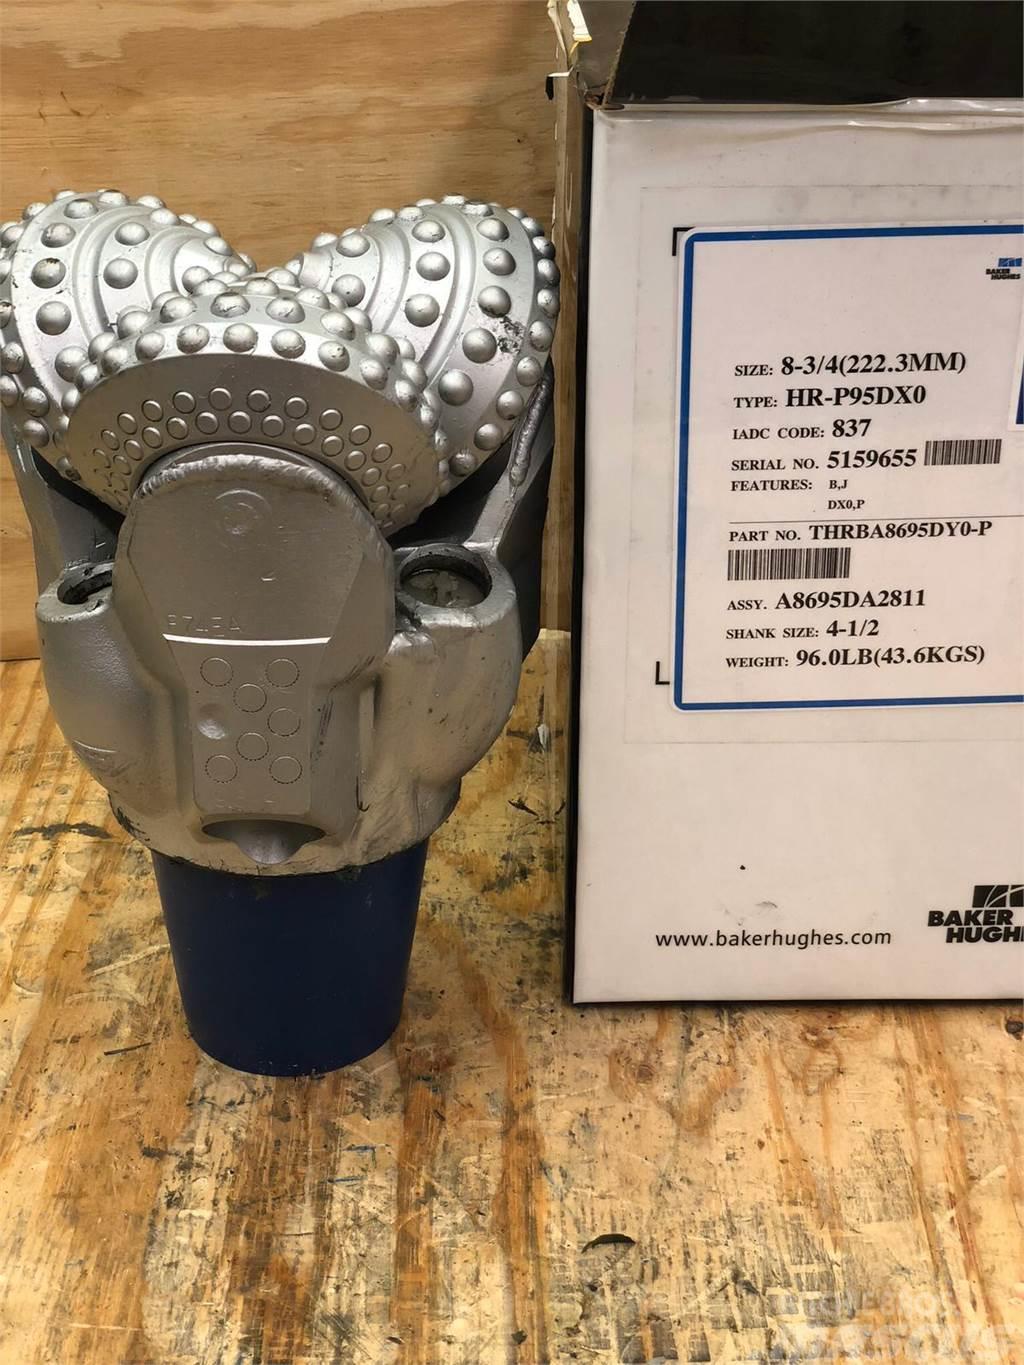 Baker Hughes 8-3/4” Baker Hughes Tri-Cone Bit Drilling equipment accessories and spare parts